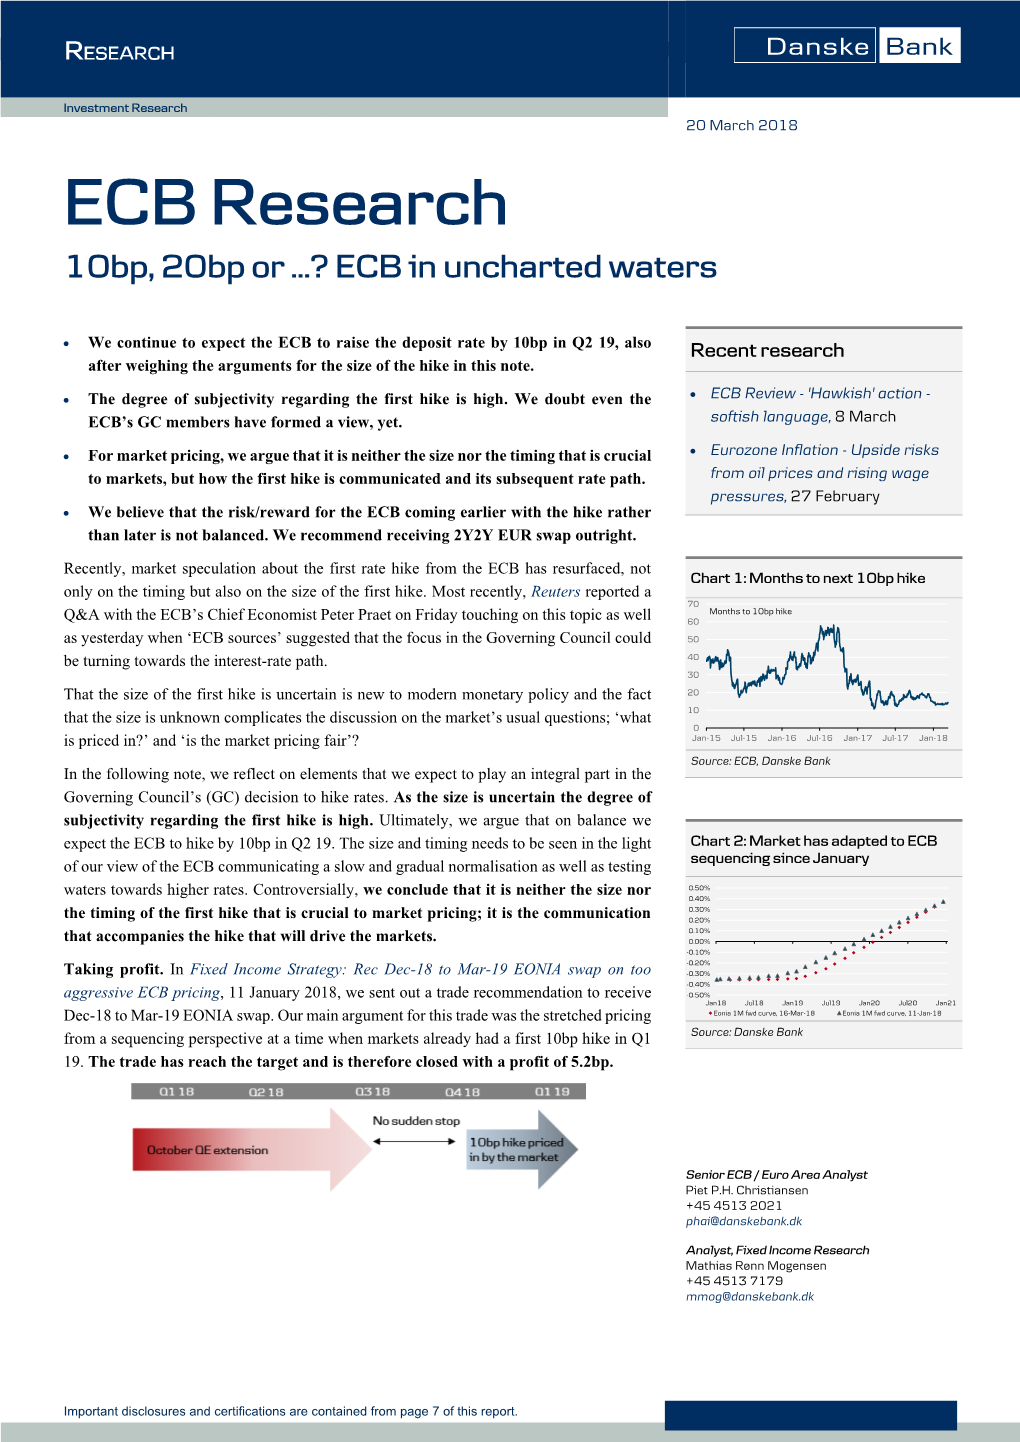 ECB Research 10Bp, 20Bp Or …? ECB in Uncharted Waters